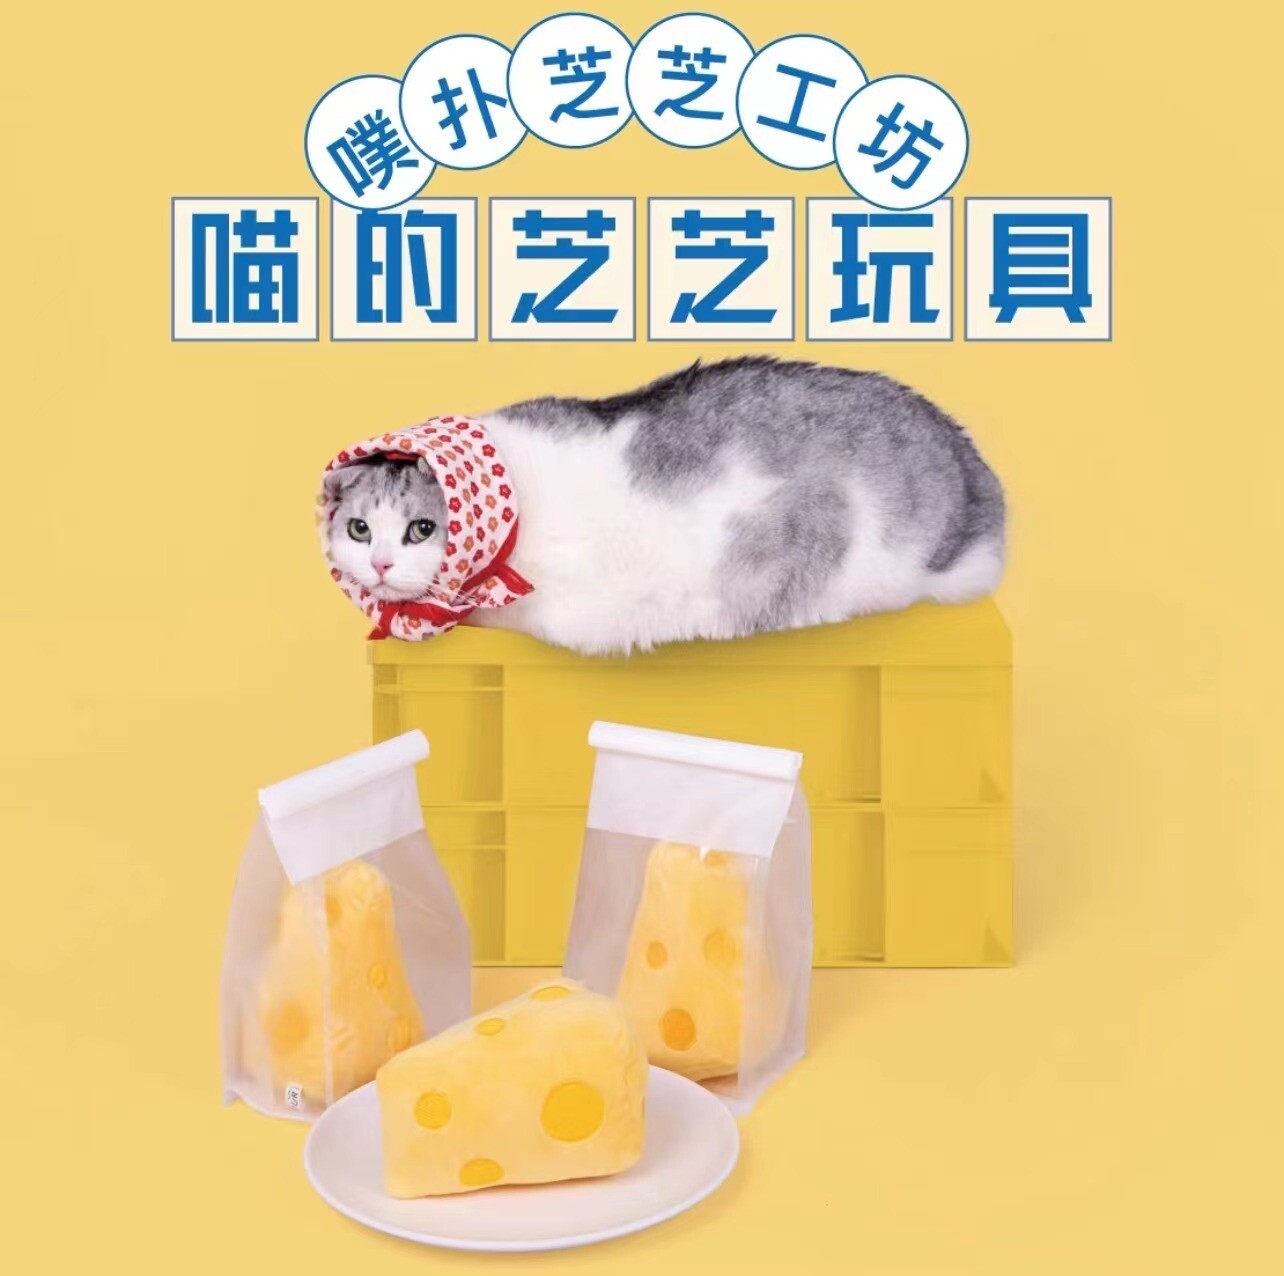 PurLab 噗扑实验室 CheeseCake Cat Toy 芝士蛋糕玩具